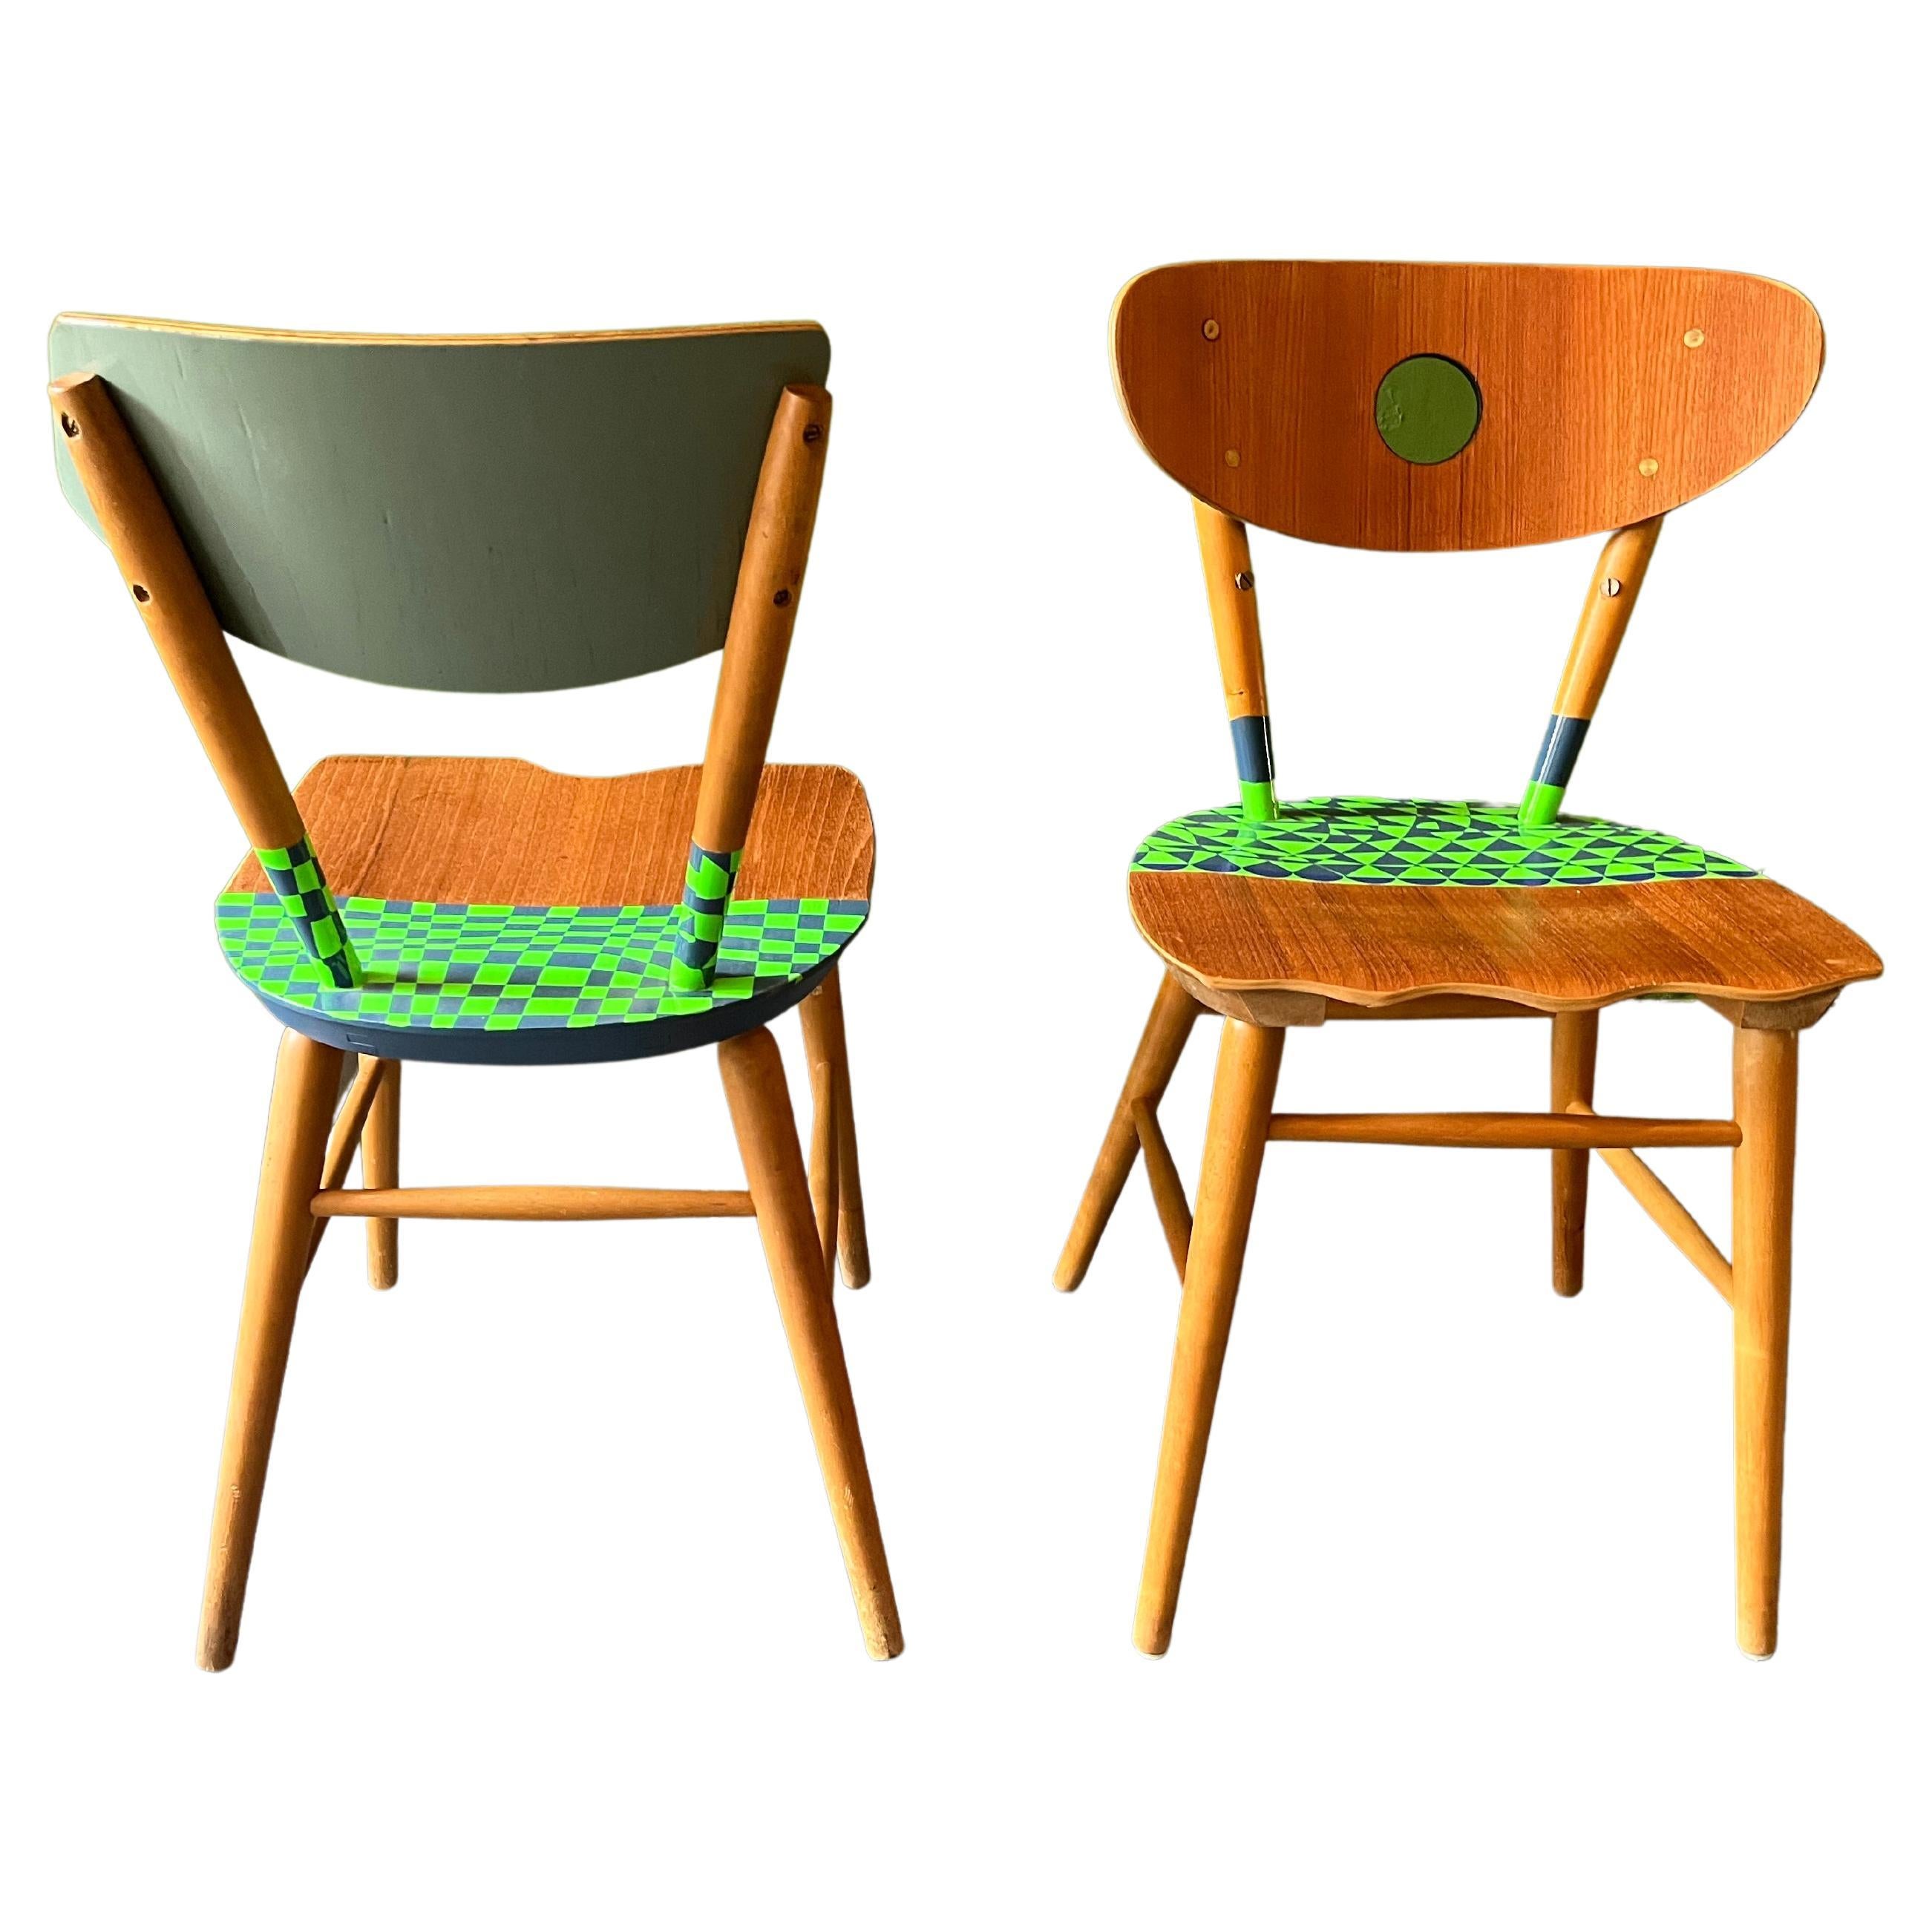 Two Yngve Ekström chairs contemporized. Cut, painted and lacquered. Pattern inspired by Grignani. 
I learn out of a past that has been created for me, a foundation to build on my own work
And create new pathes of art, design and everything that